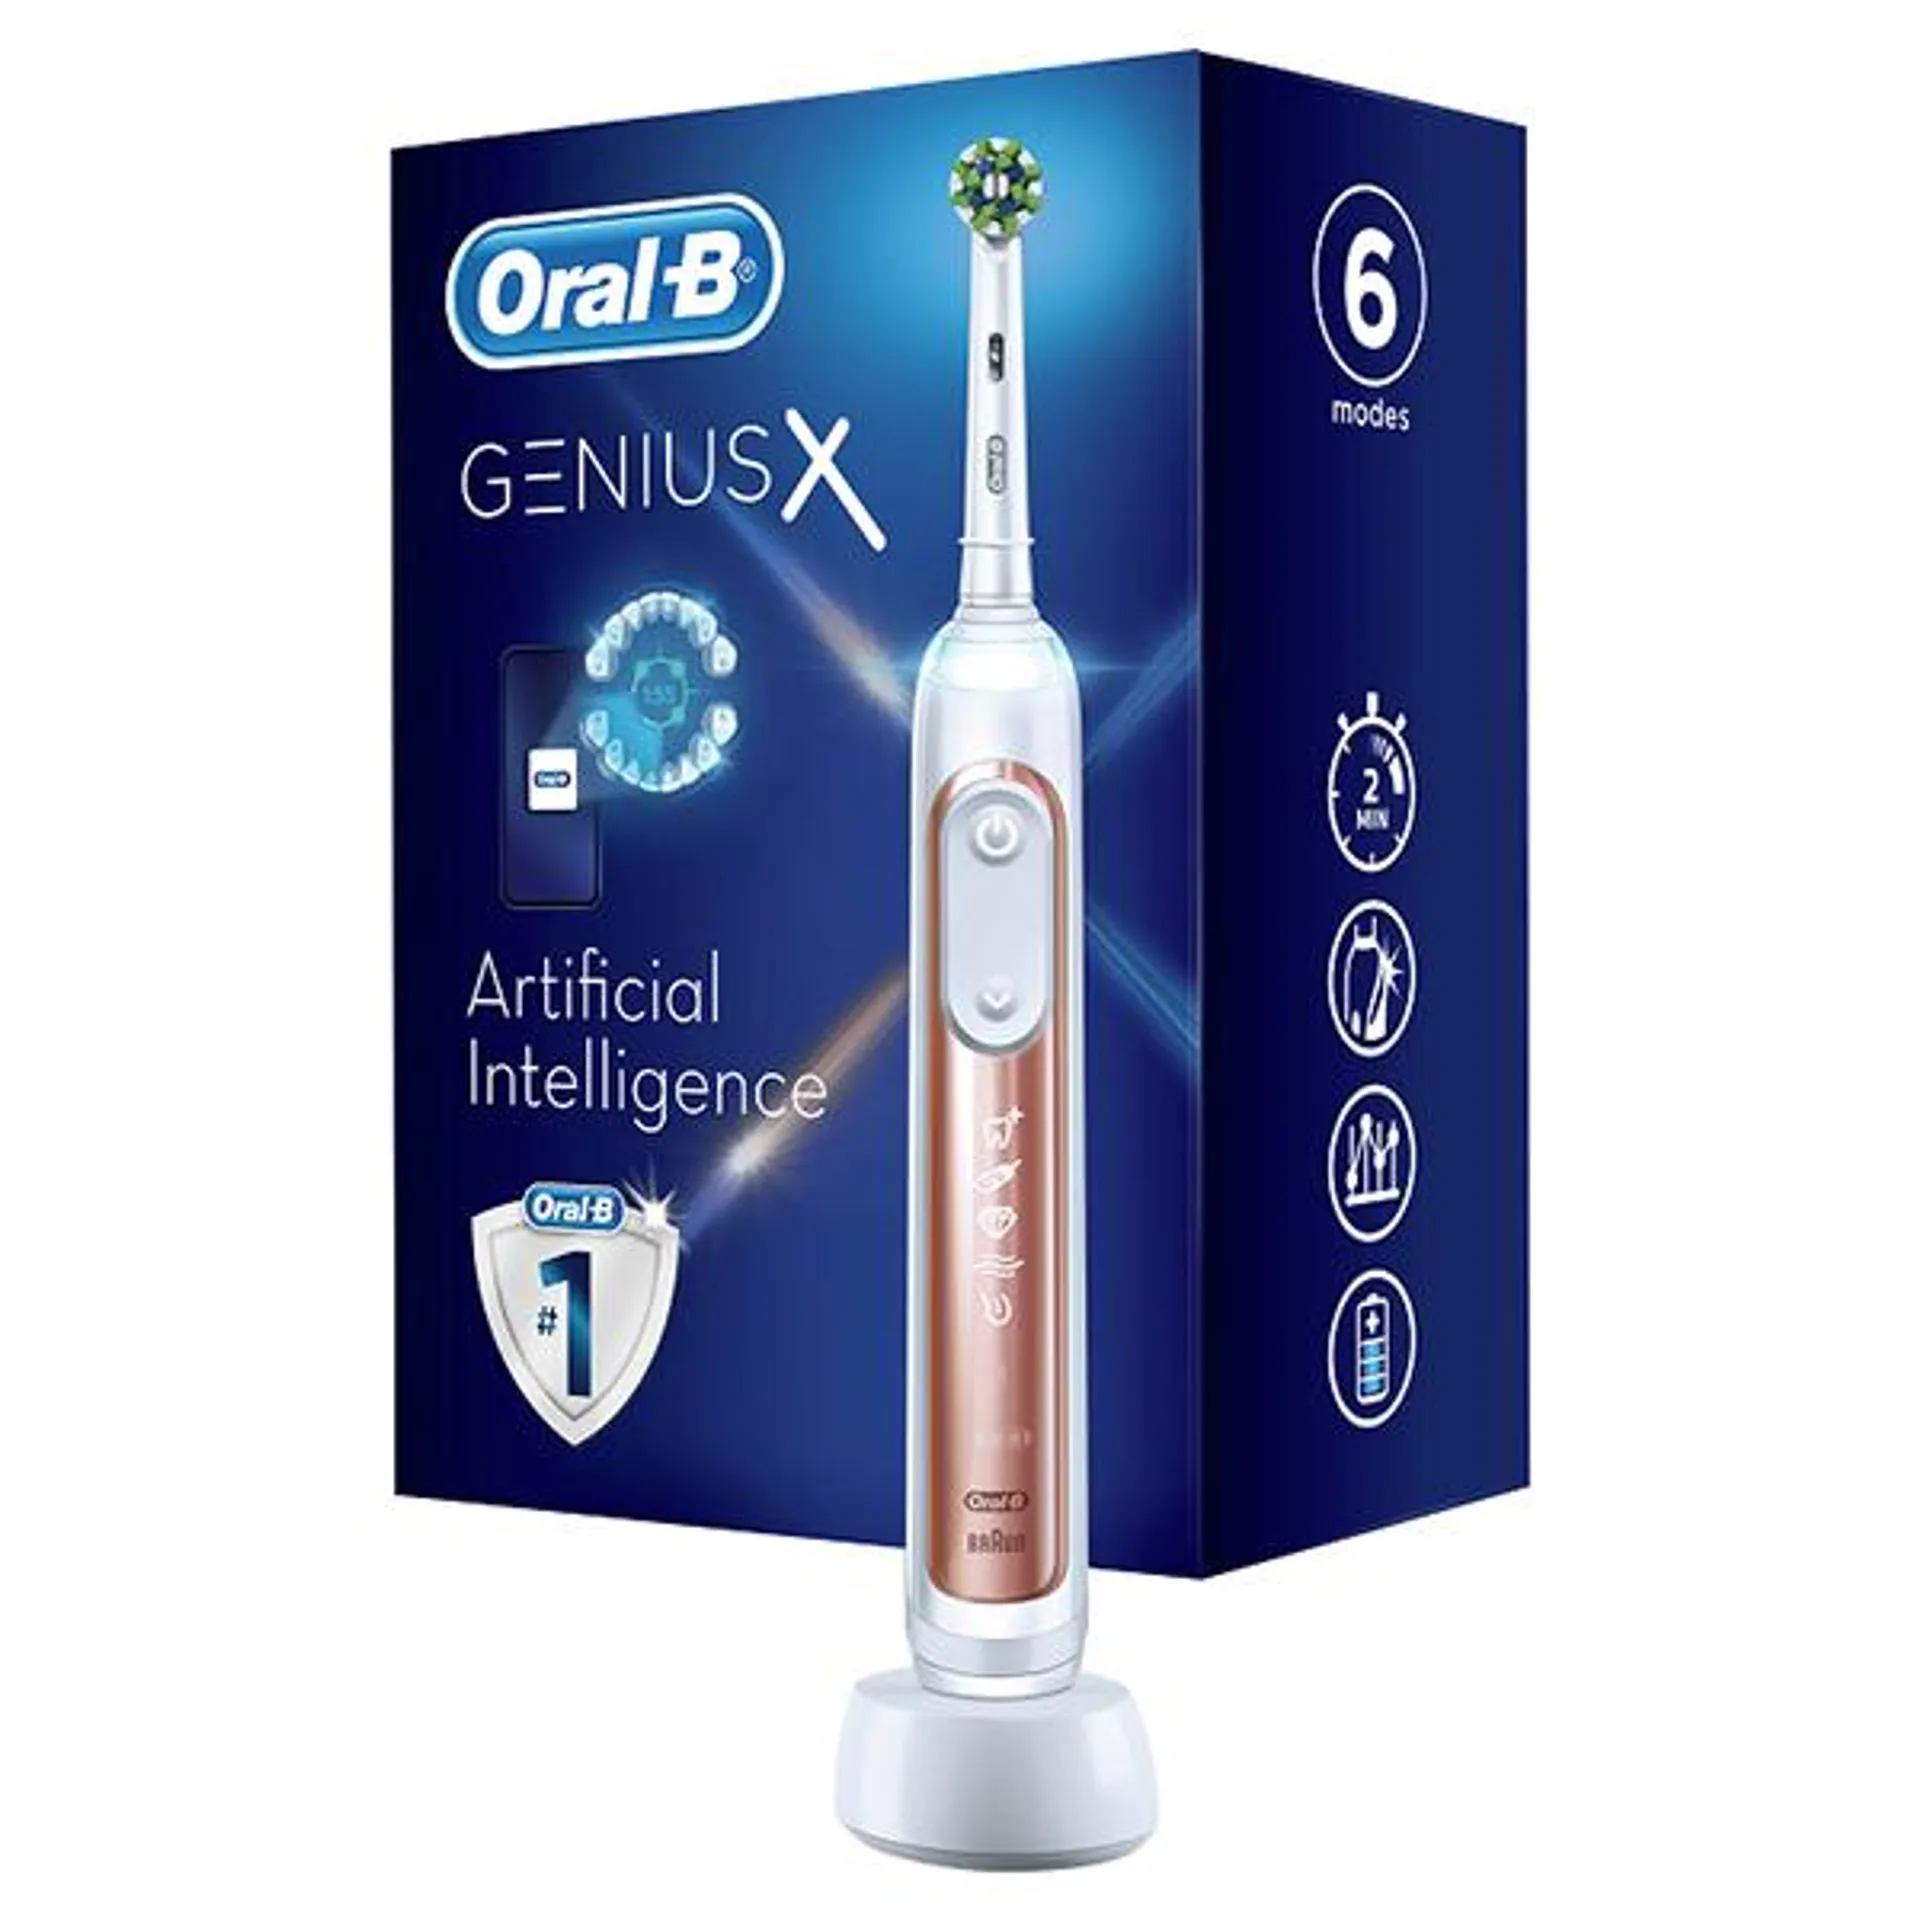 Oral-B Genius X Rose Gold Electric Rechargeable Toothbrush